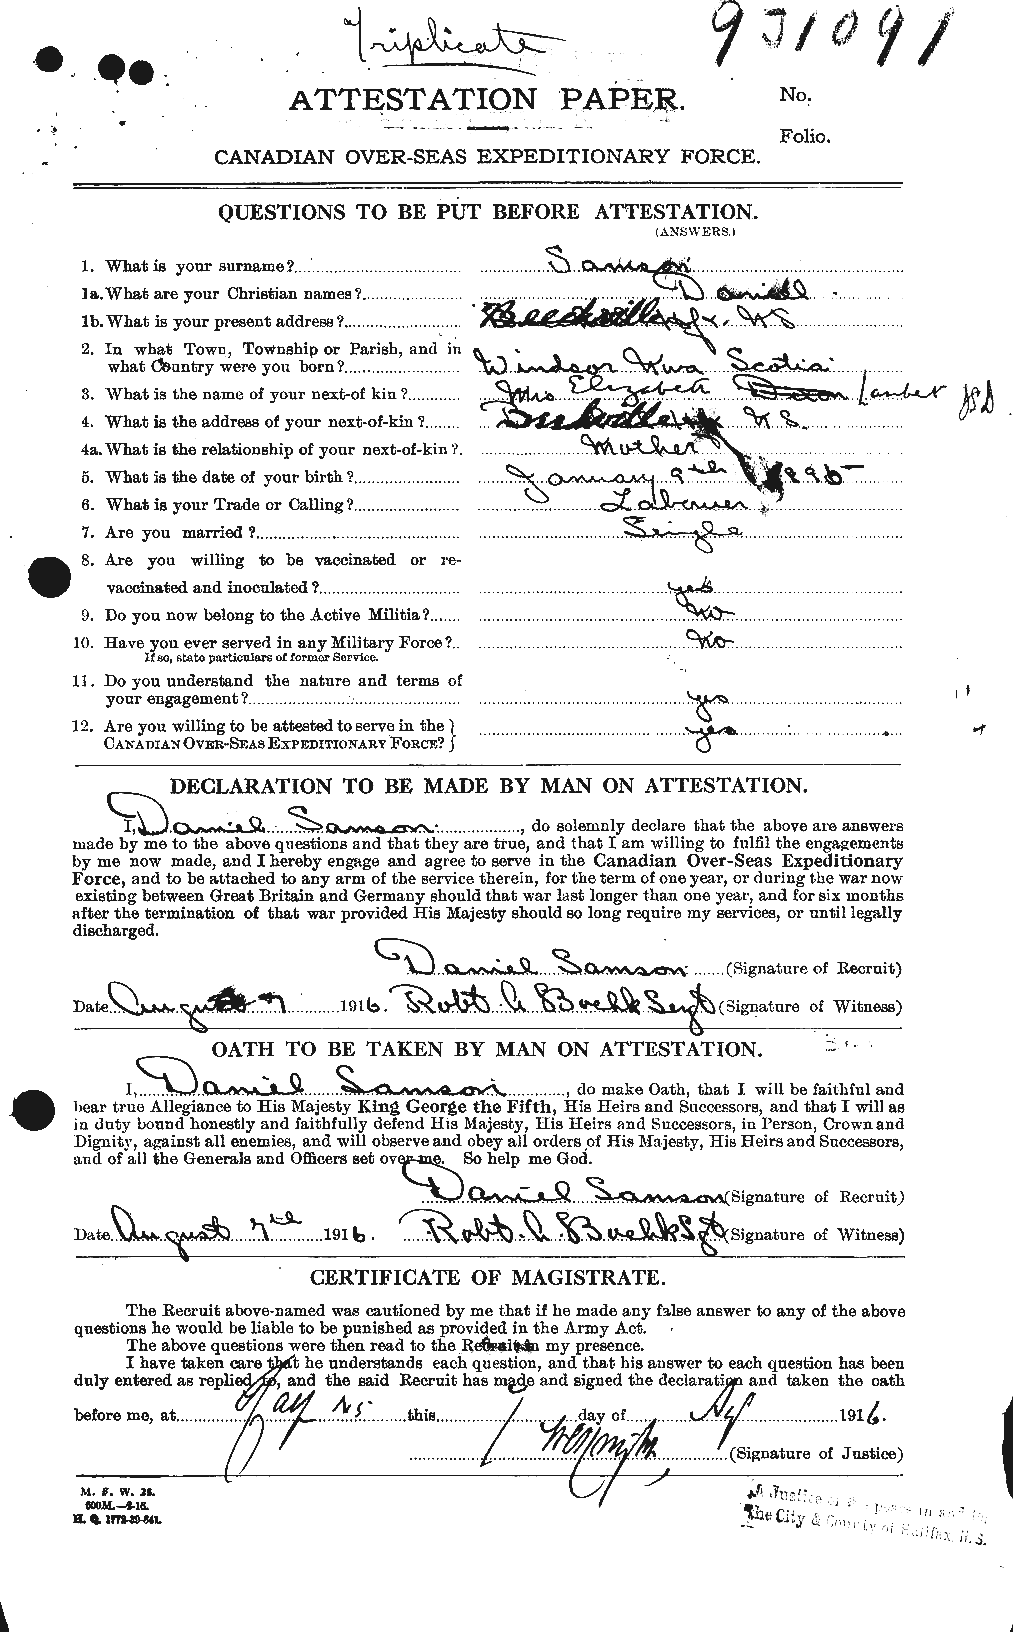 Personnel Records of the First World War - CEF 619644a